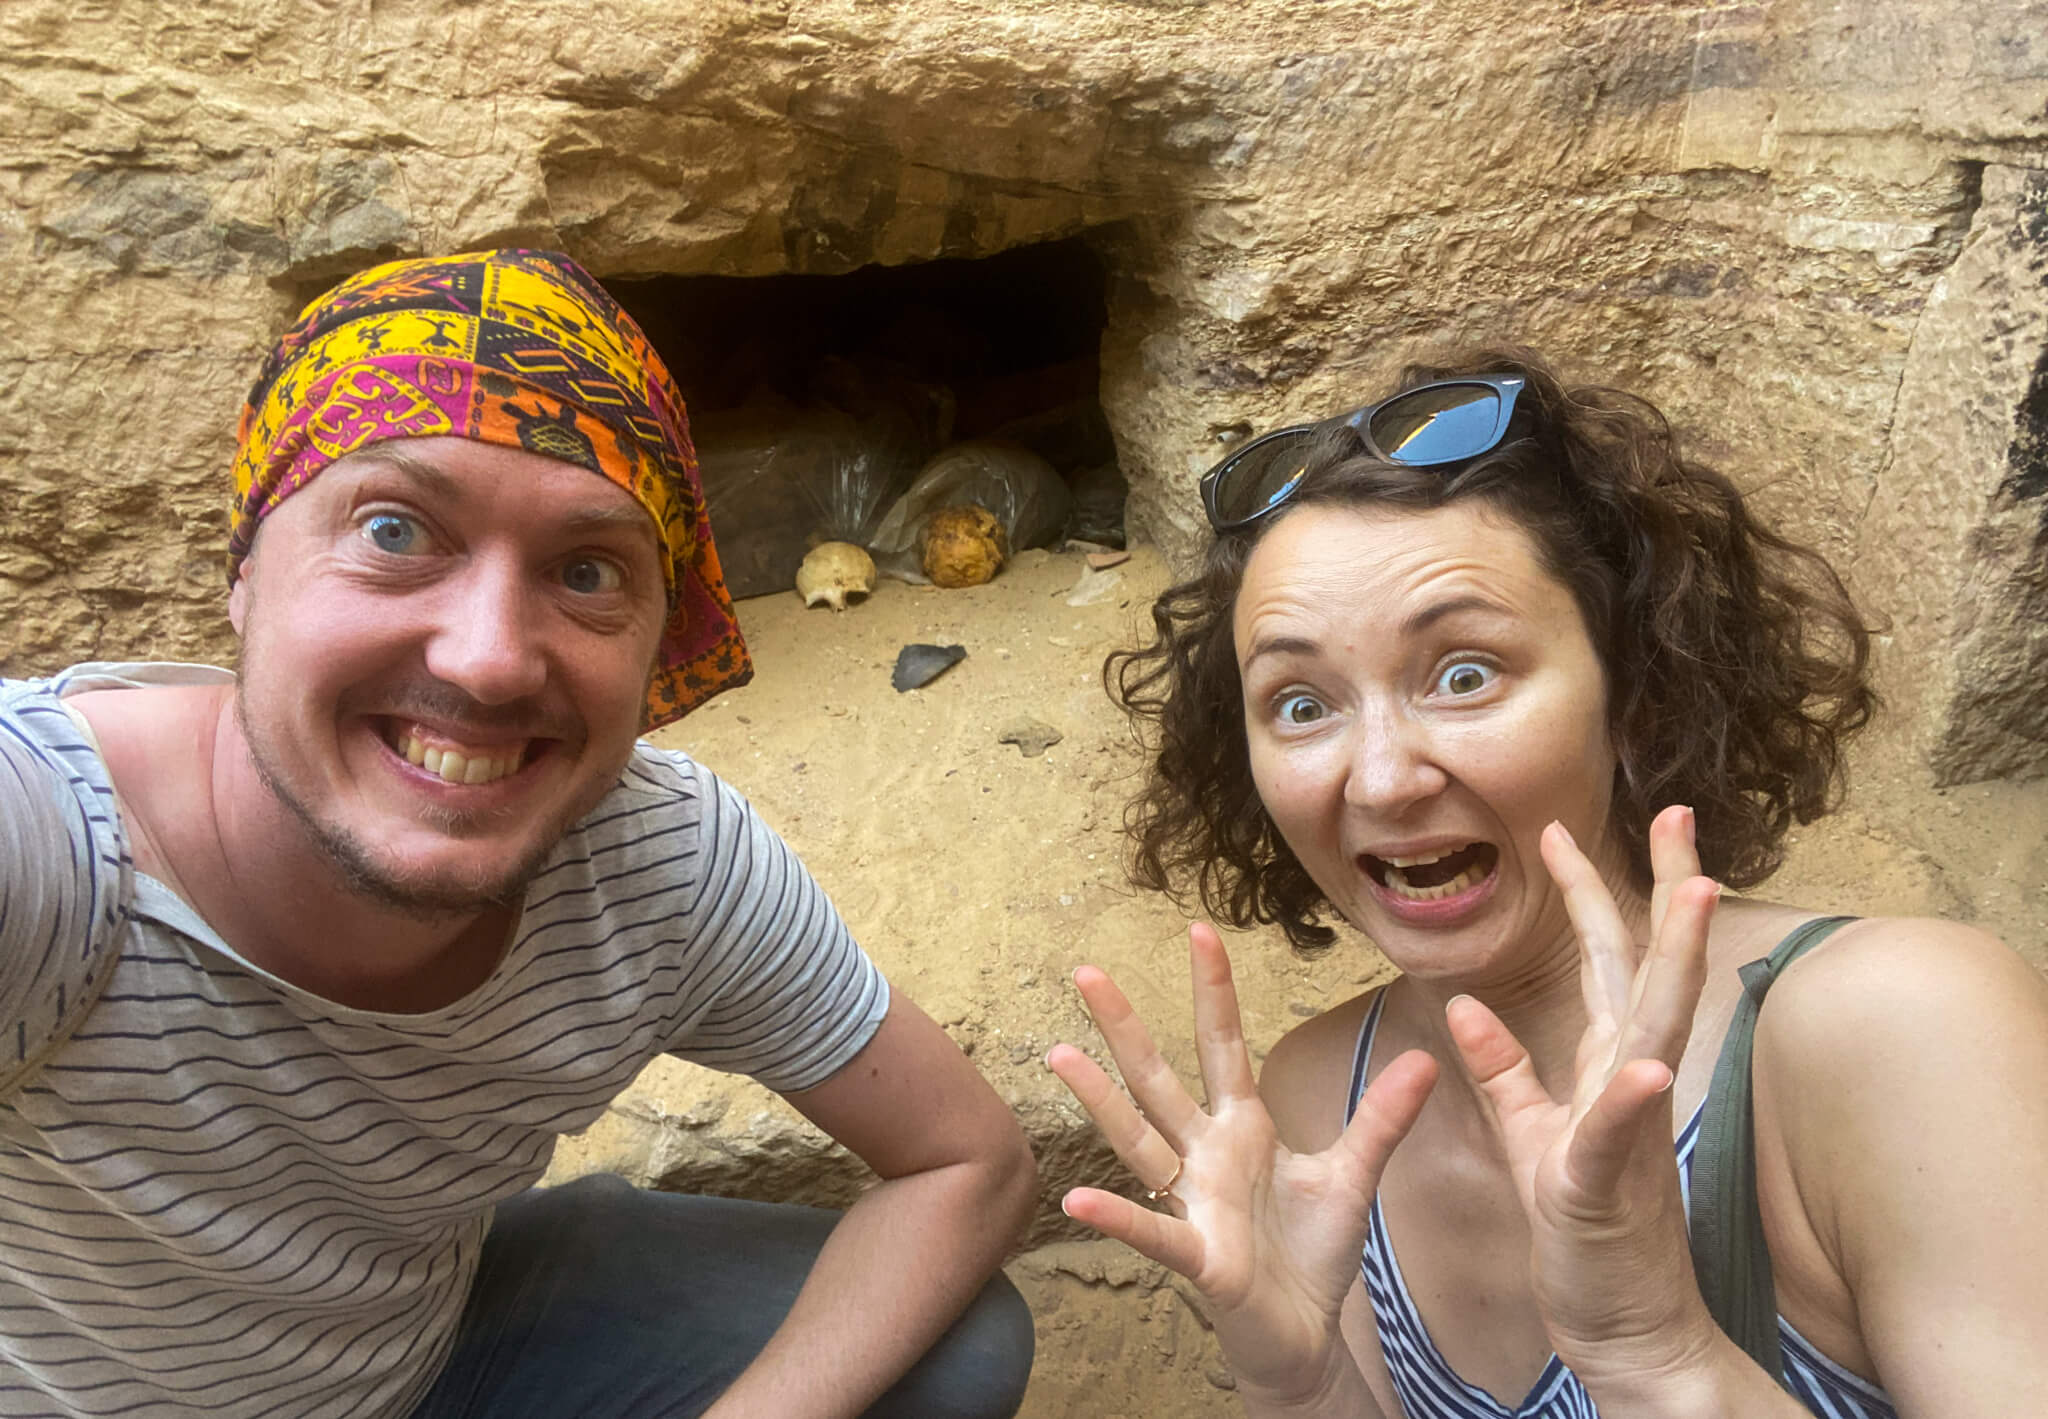 Anna and I in the desert looking shocked at two two human skulls we found.